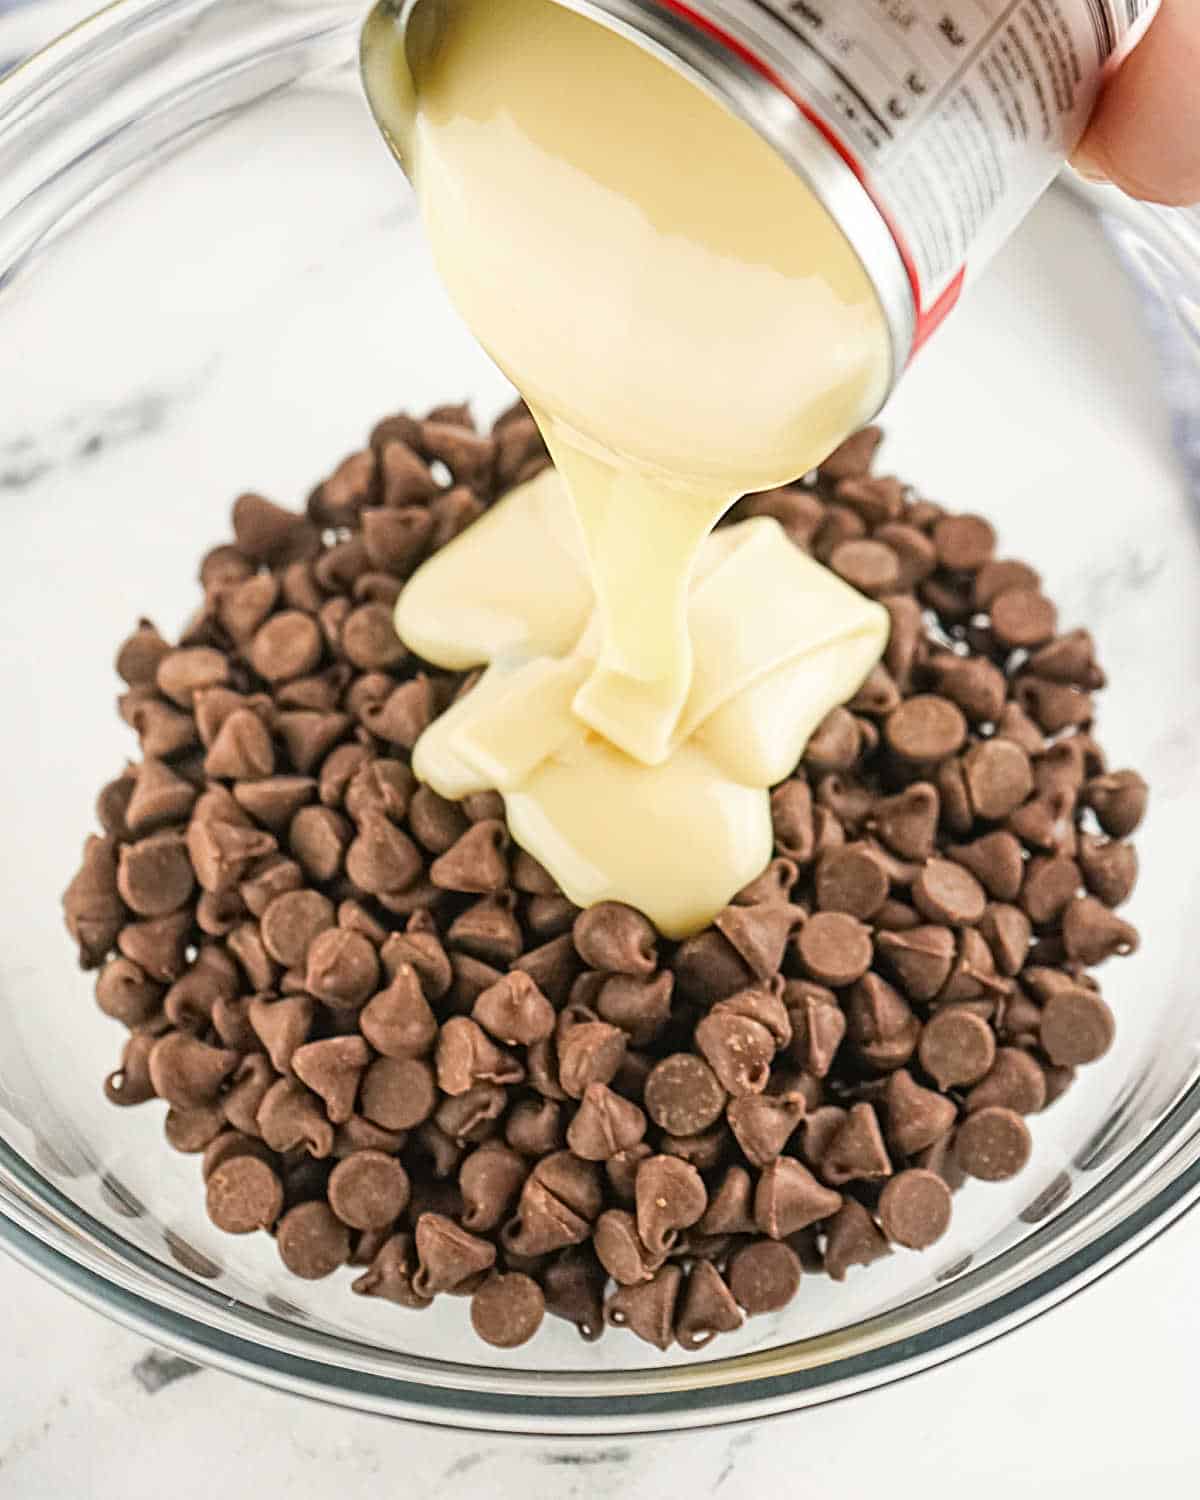 Pouring a can of condensed milk on chocolate chips in a glass bowl.